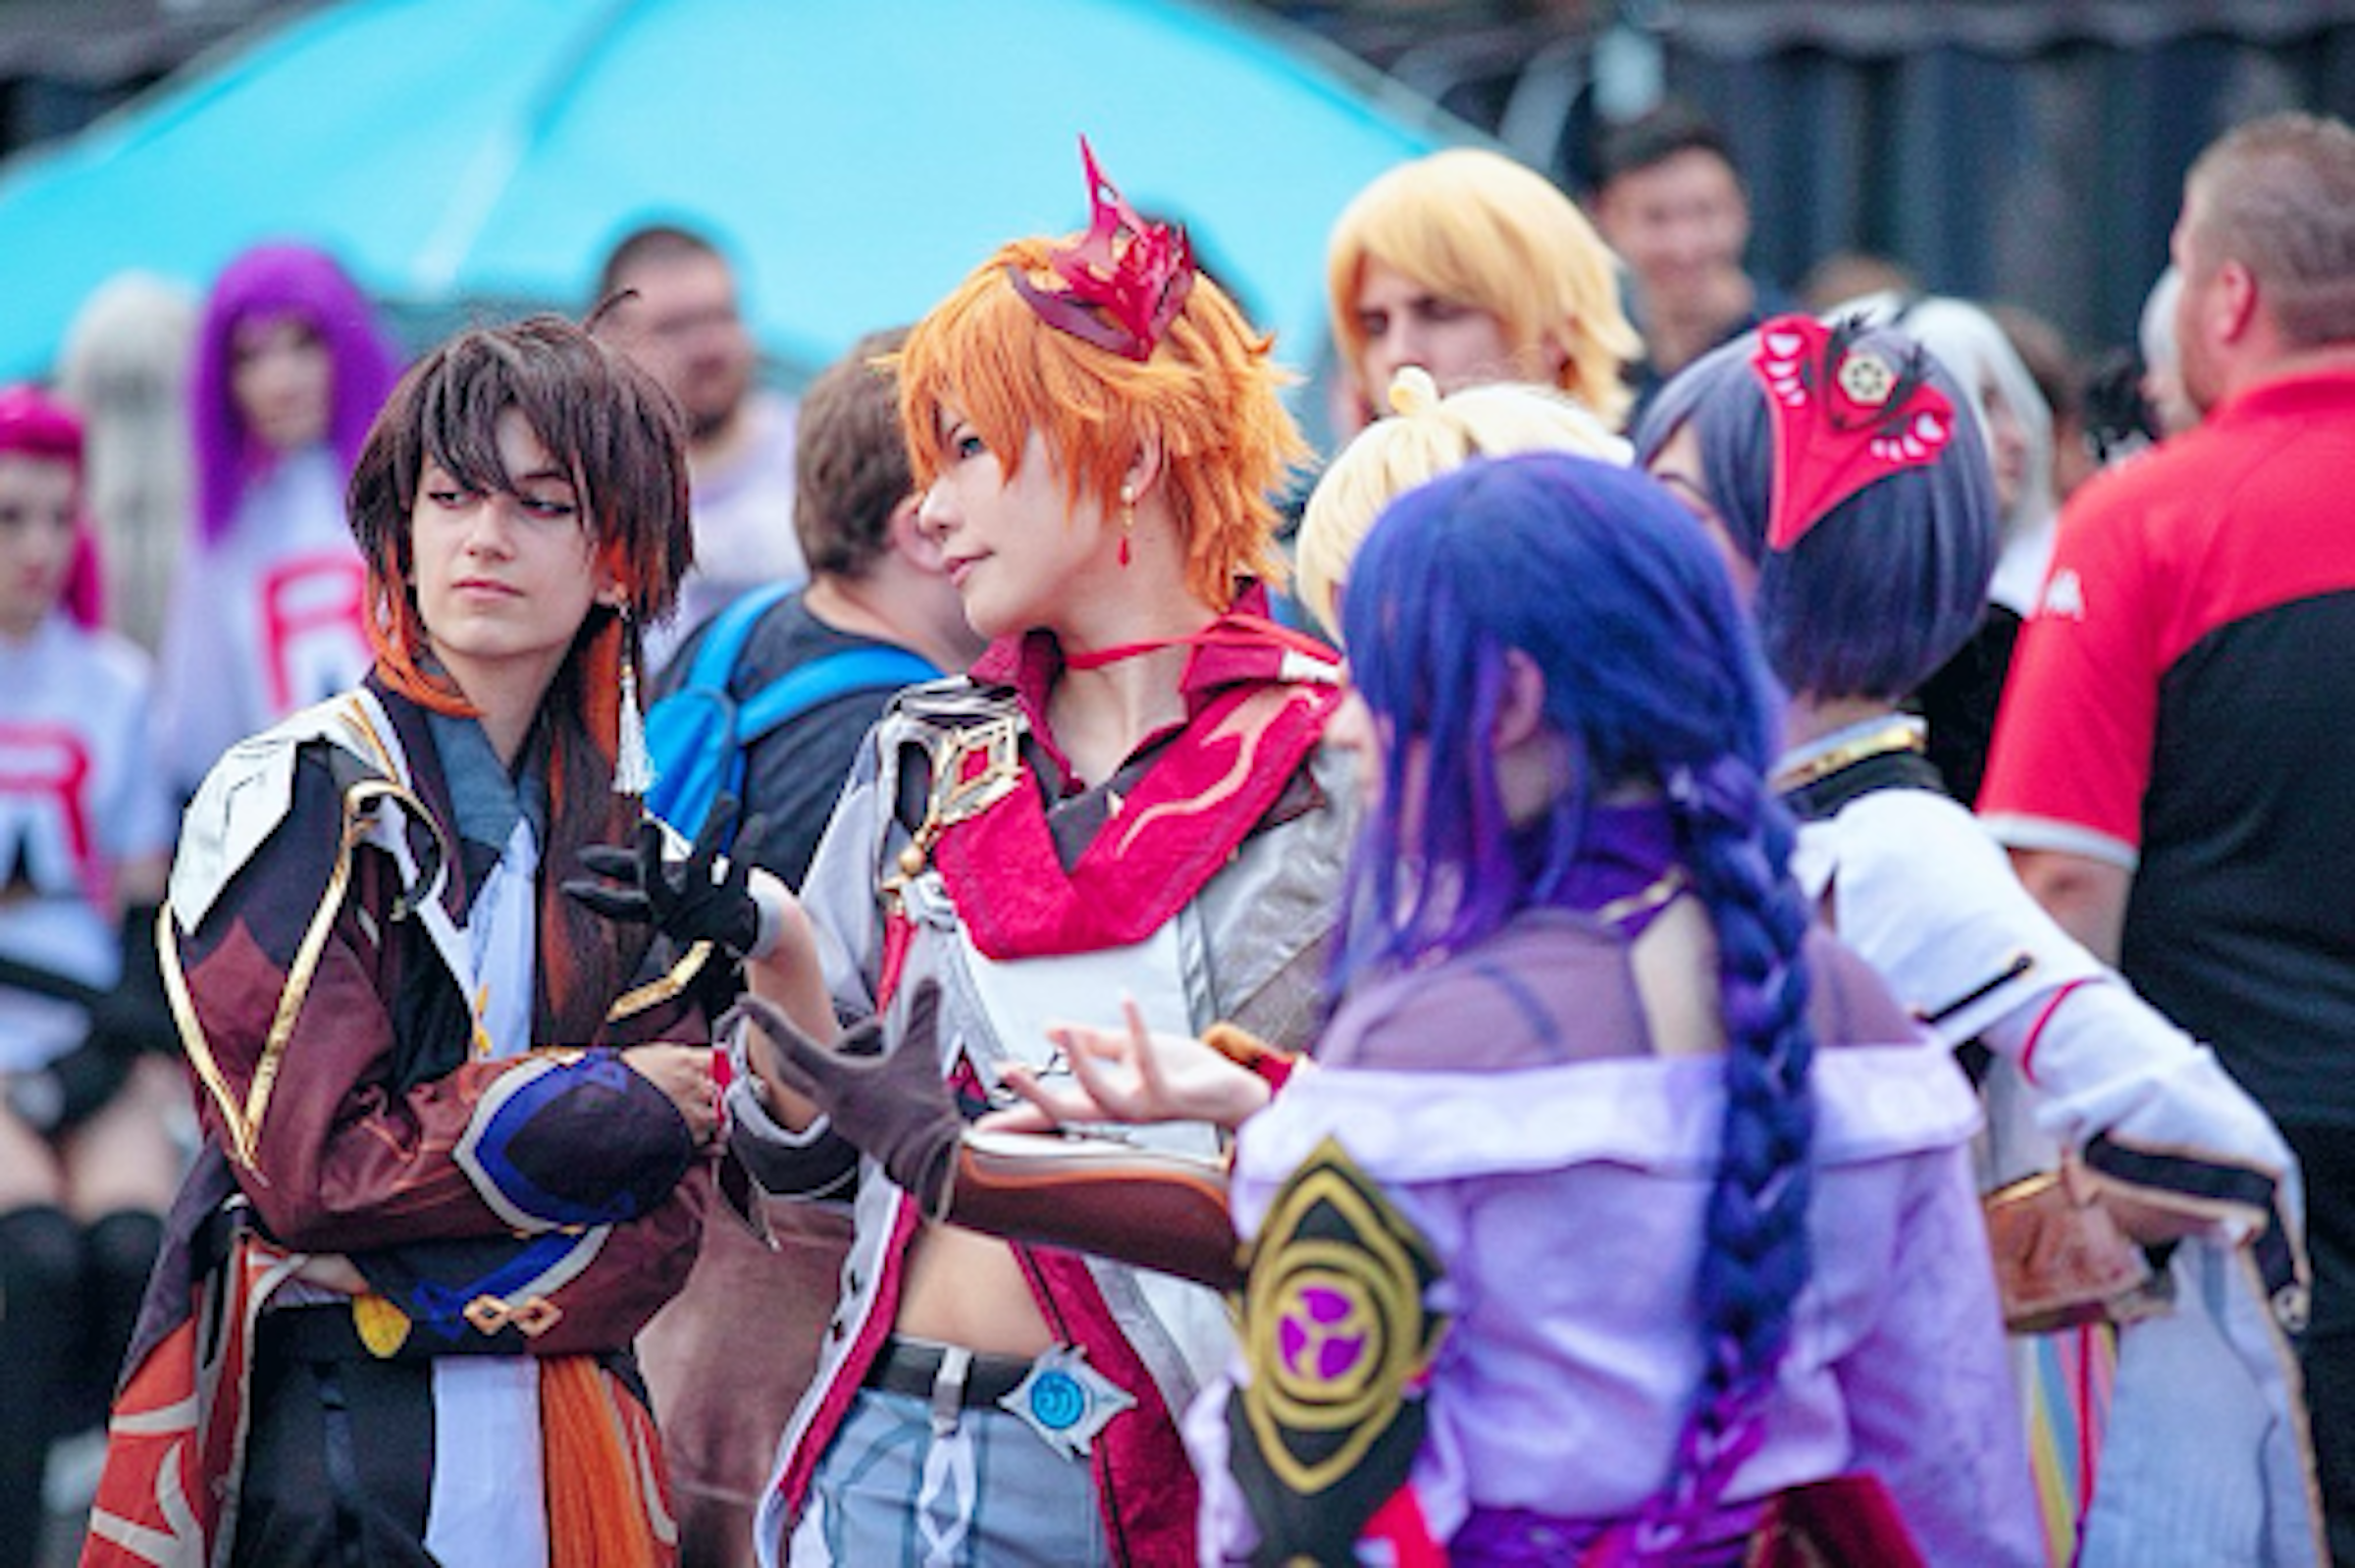 Cosplay event in Bulgaria